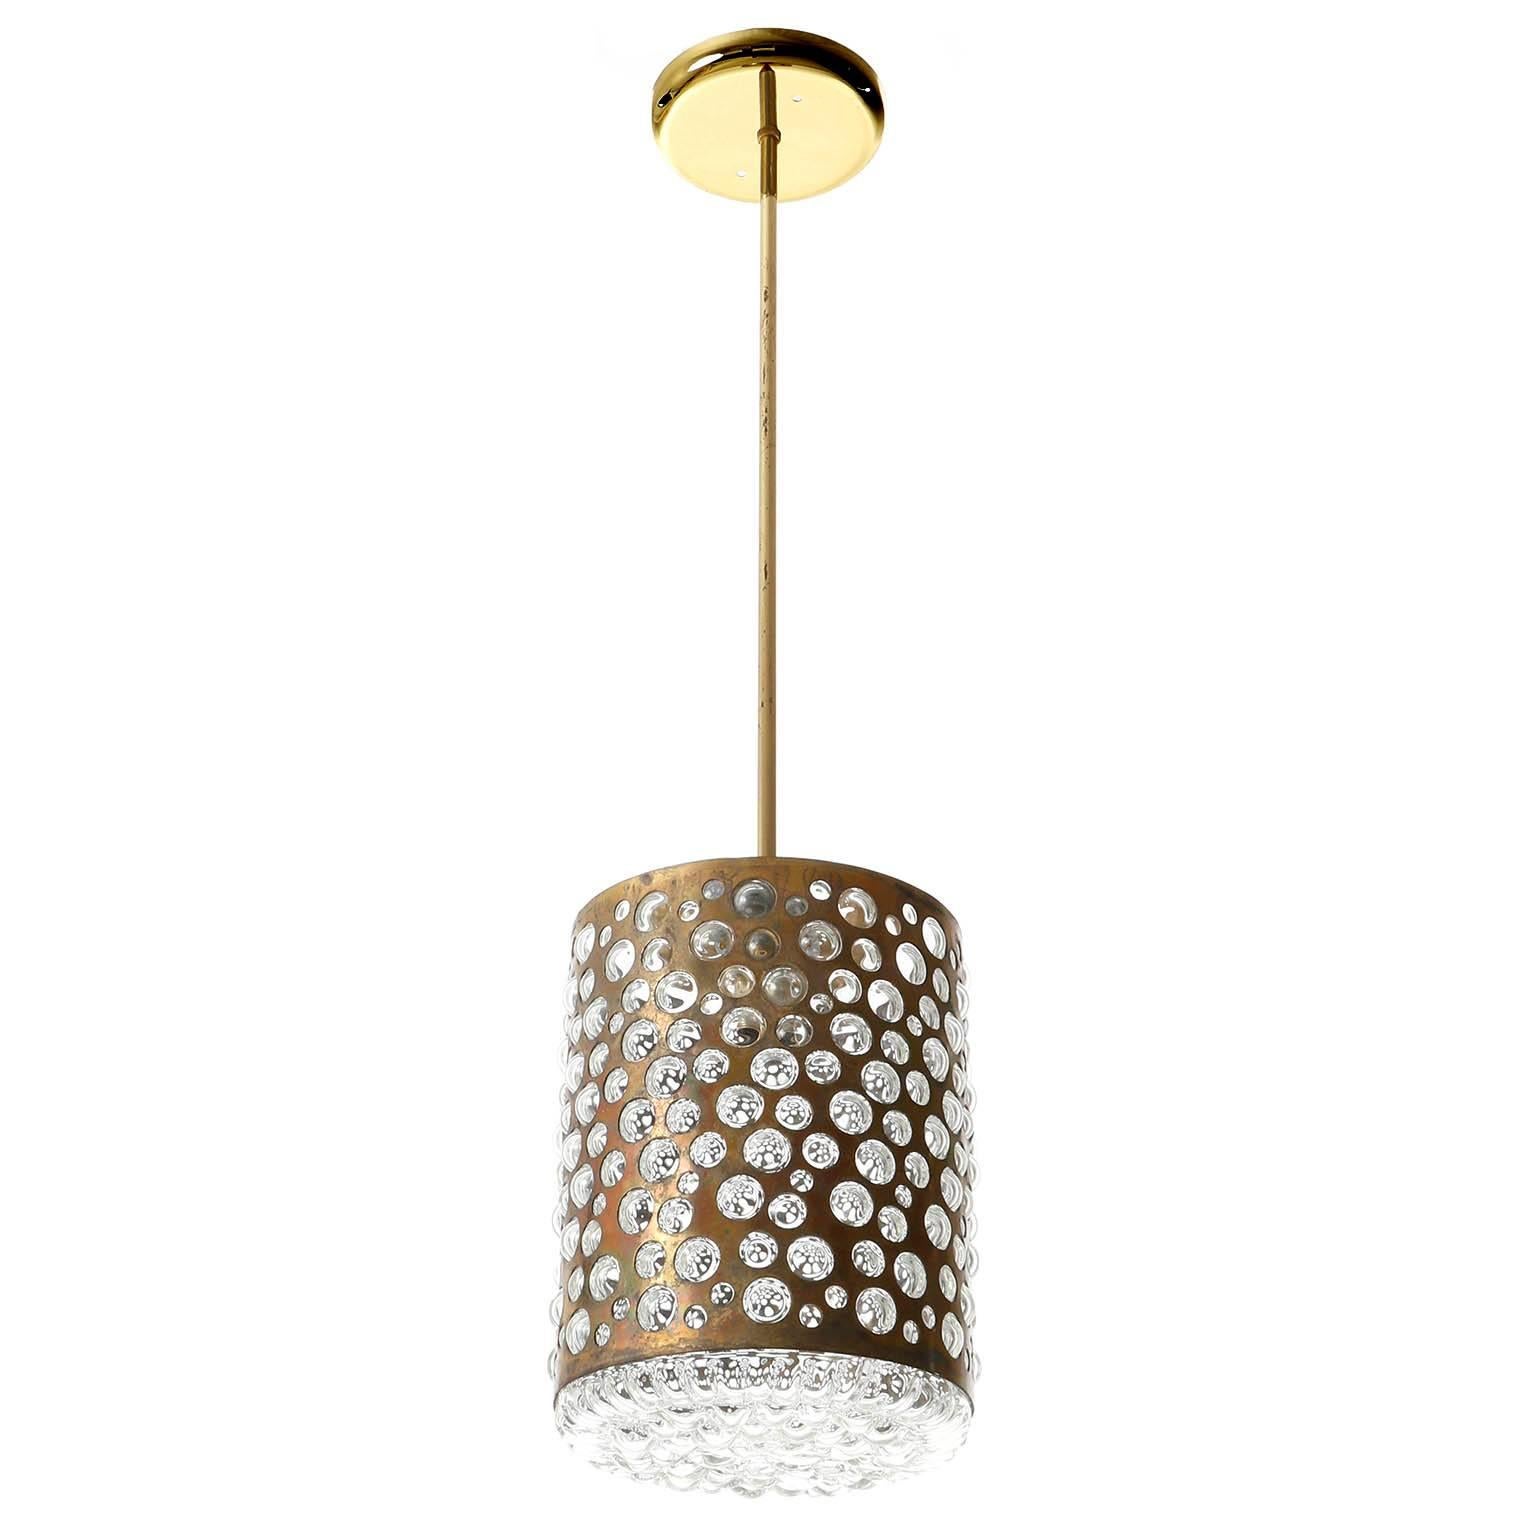 One of three very rare and exceptional pendants by Rupert Nikoll, Vienna, manufactured in midcentury, circa 1960 (late 1950s or early 1960s).
The textured glass is similar to the lights of Kalmar or Limburg from that time period.
The light fixtures